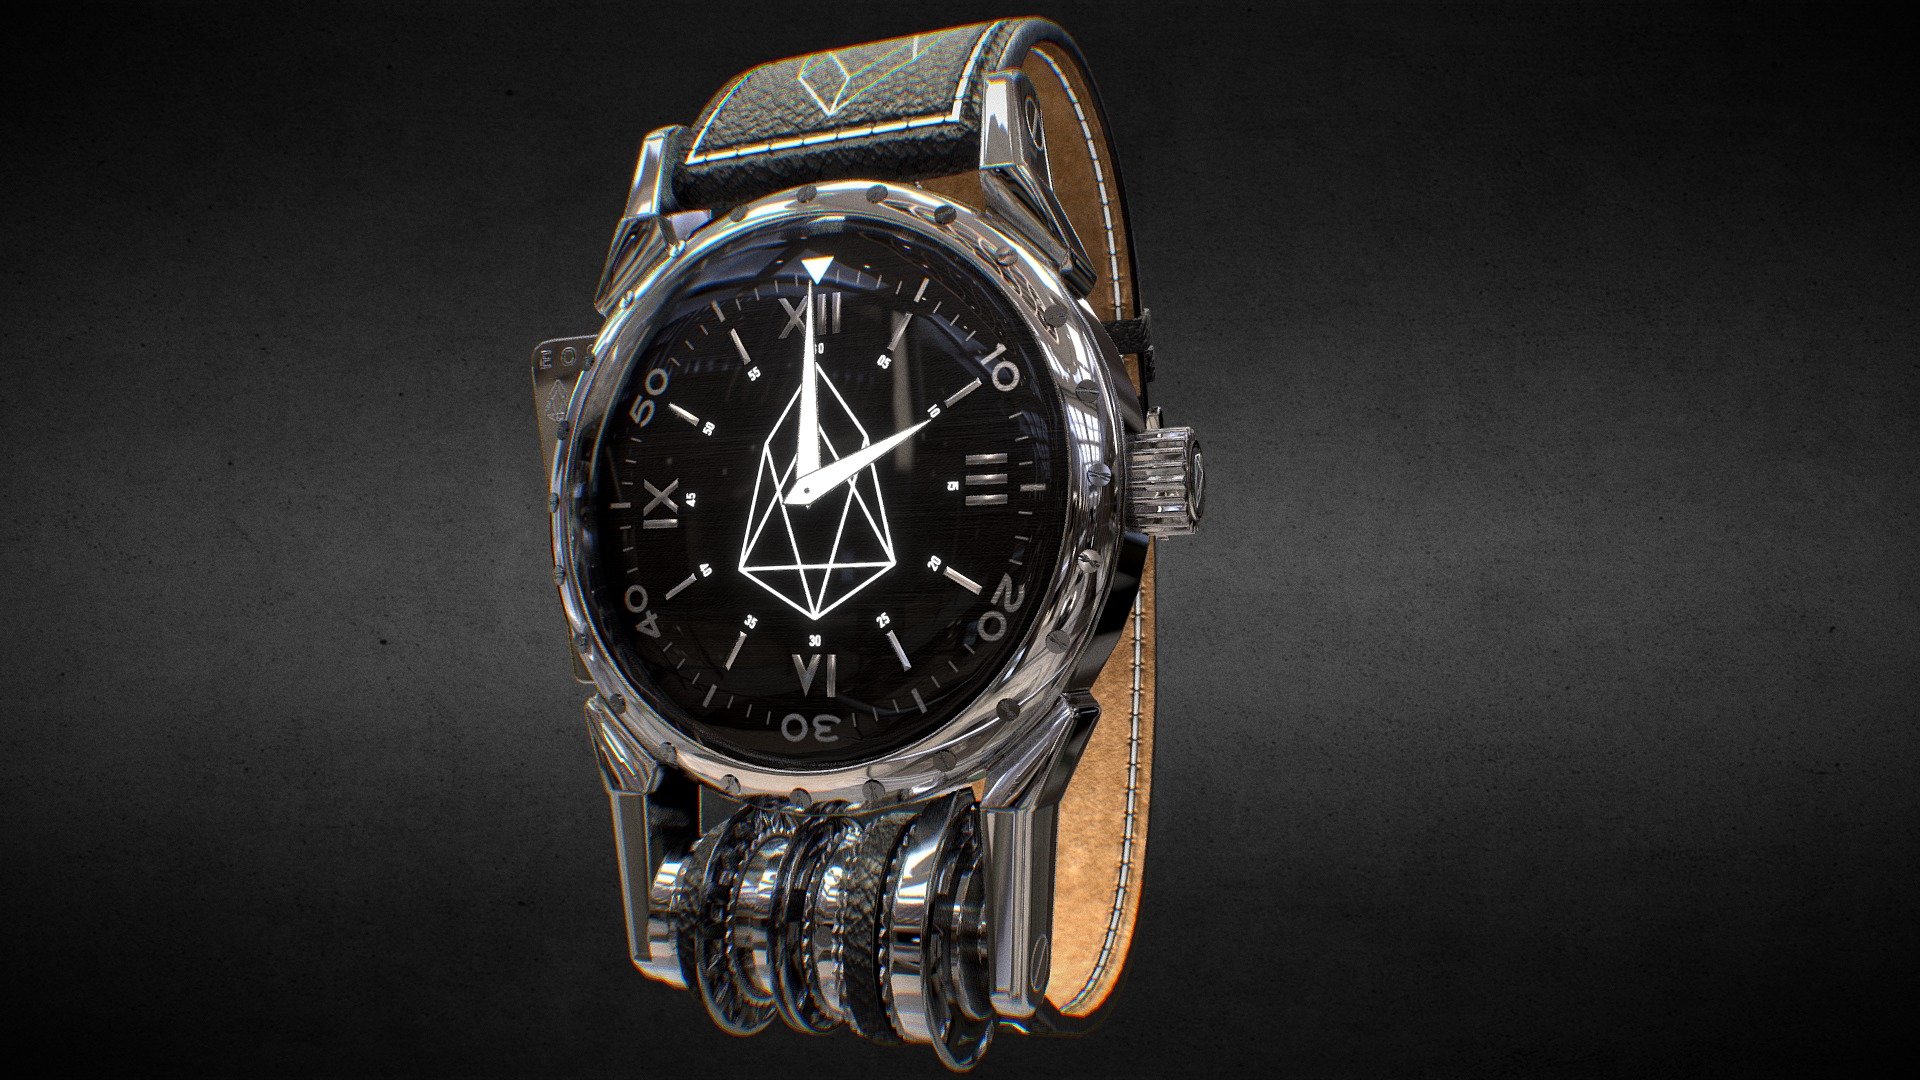 Awesome stainless steel EOS coin Watch.

Currently available for download in FBX format.

3D model developed by AR-Watches 3d model